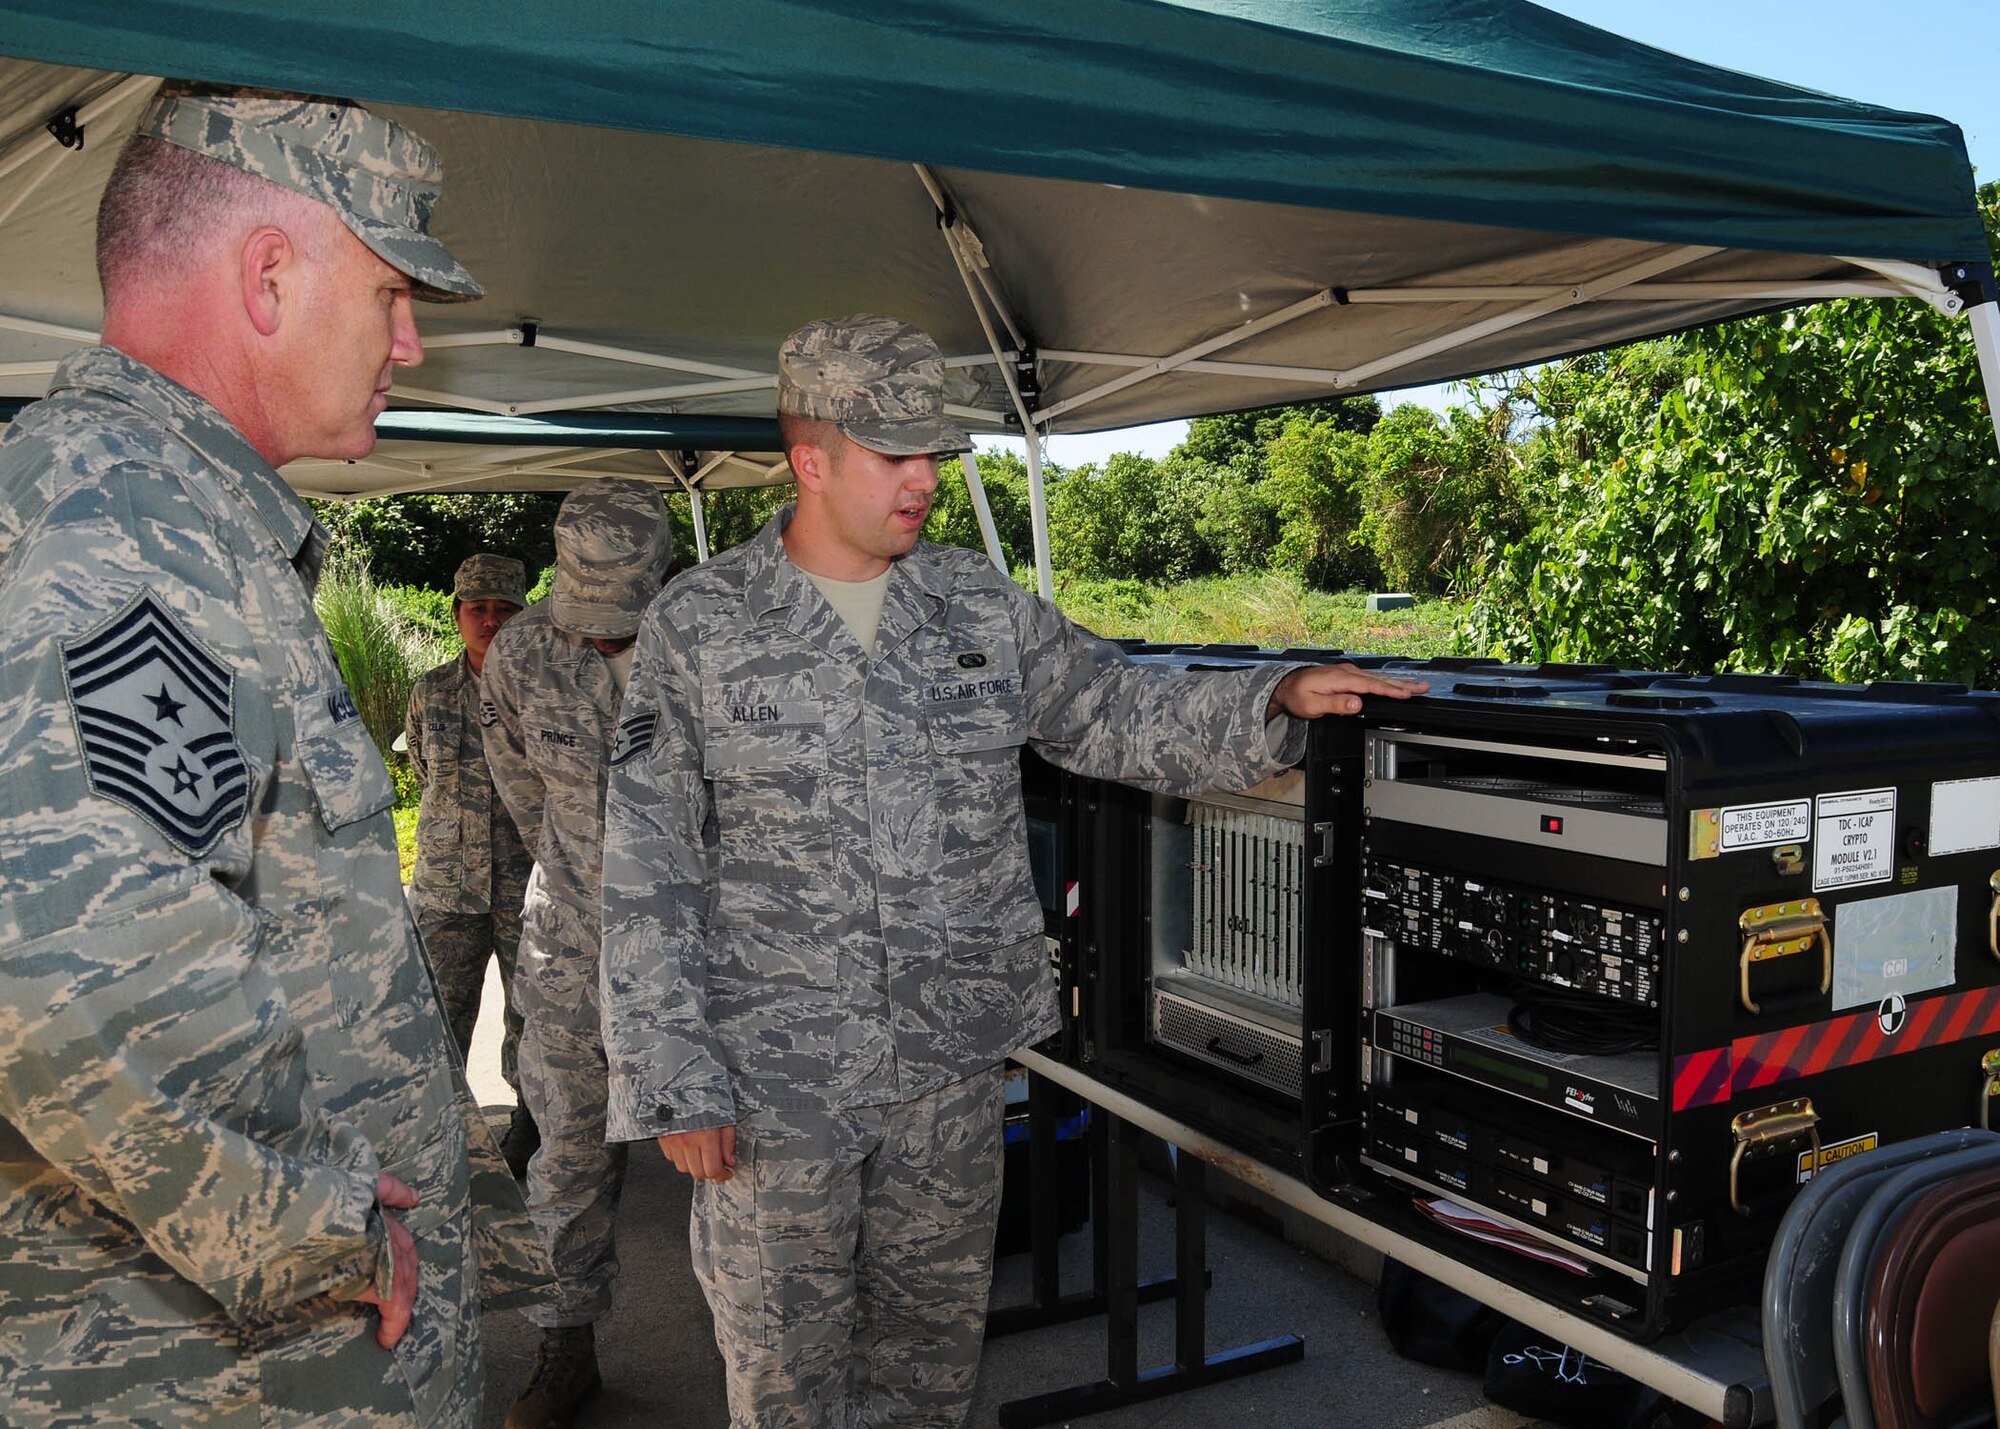 ANDERSEN AIR FORCE BASE, Guam - Staff Sgt. Brandon Allen, 644th Combat Communications Squadron, explains the capabilities and the essential communications equipment used during the bed down of a base to PACAF Command Chief Master Sgt. Brooke McLean during his visit here Nov. 9-10. (U.S. Air Force photo by Senior Airman Nichelle Anderson)